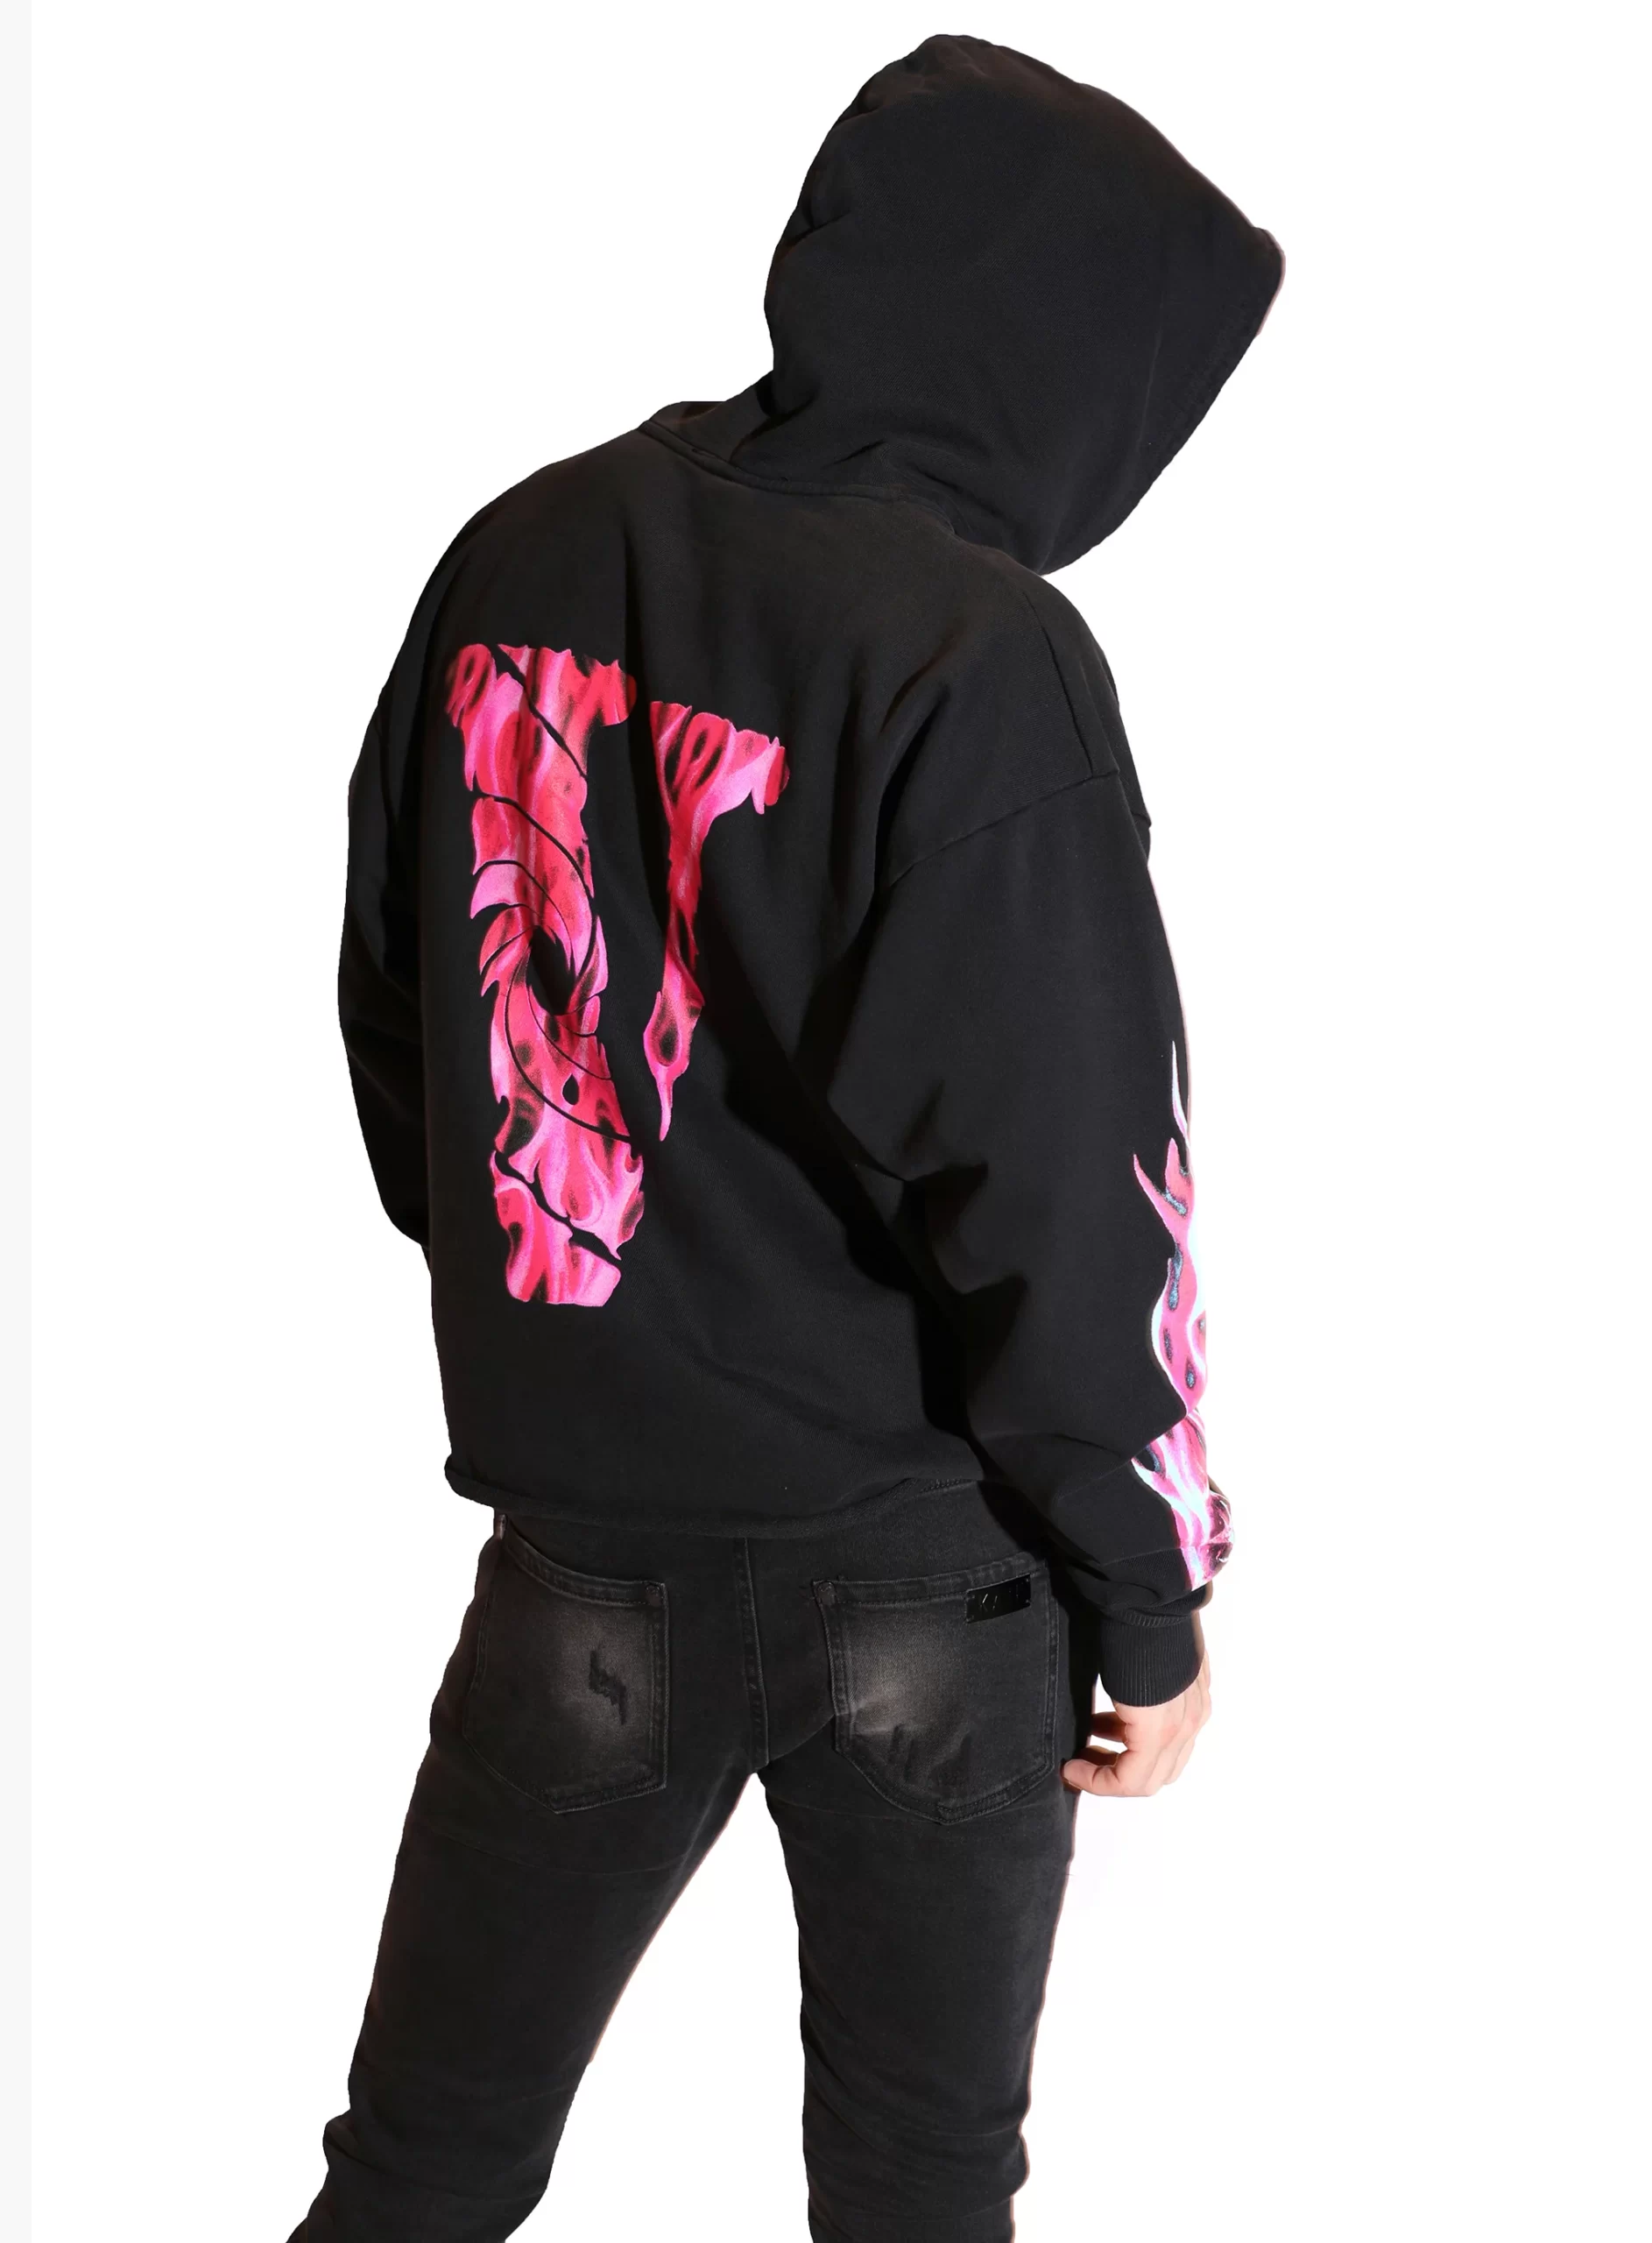 Vlone Hoodie for Most extreme Streetwear Effect